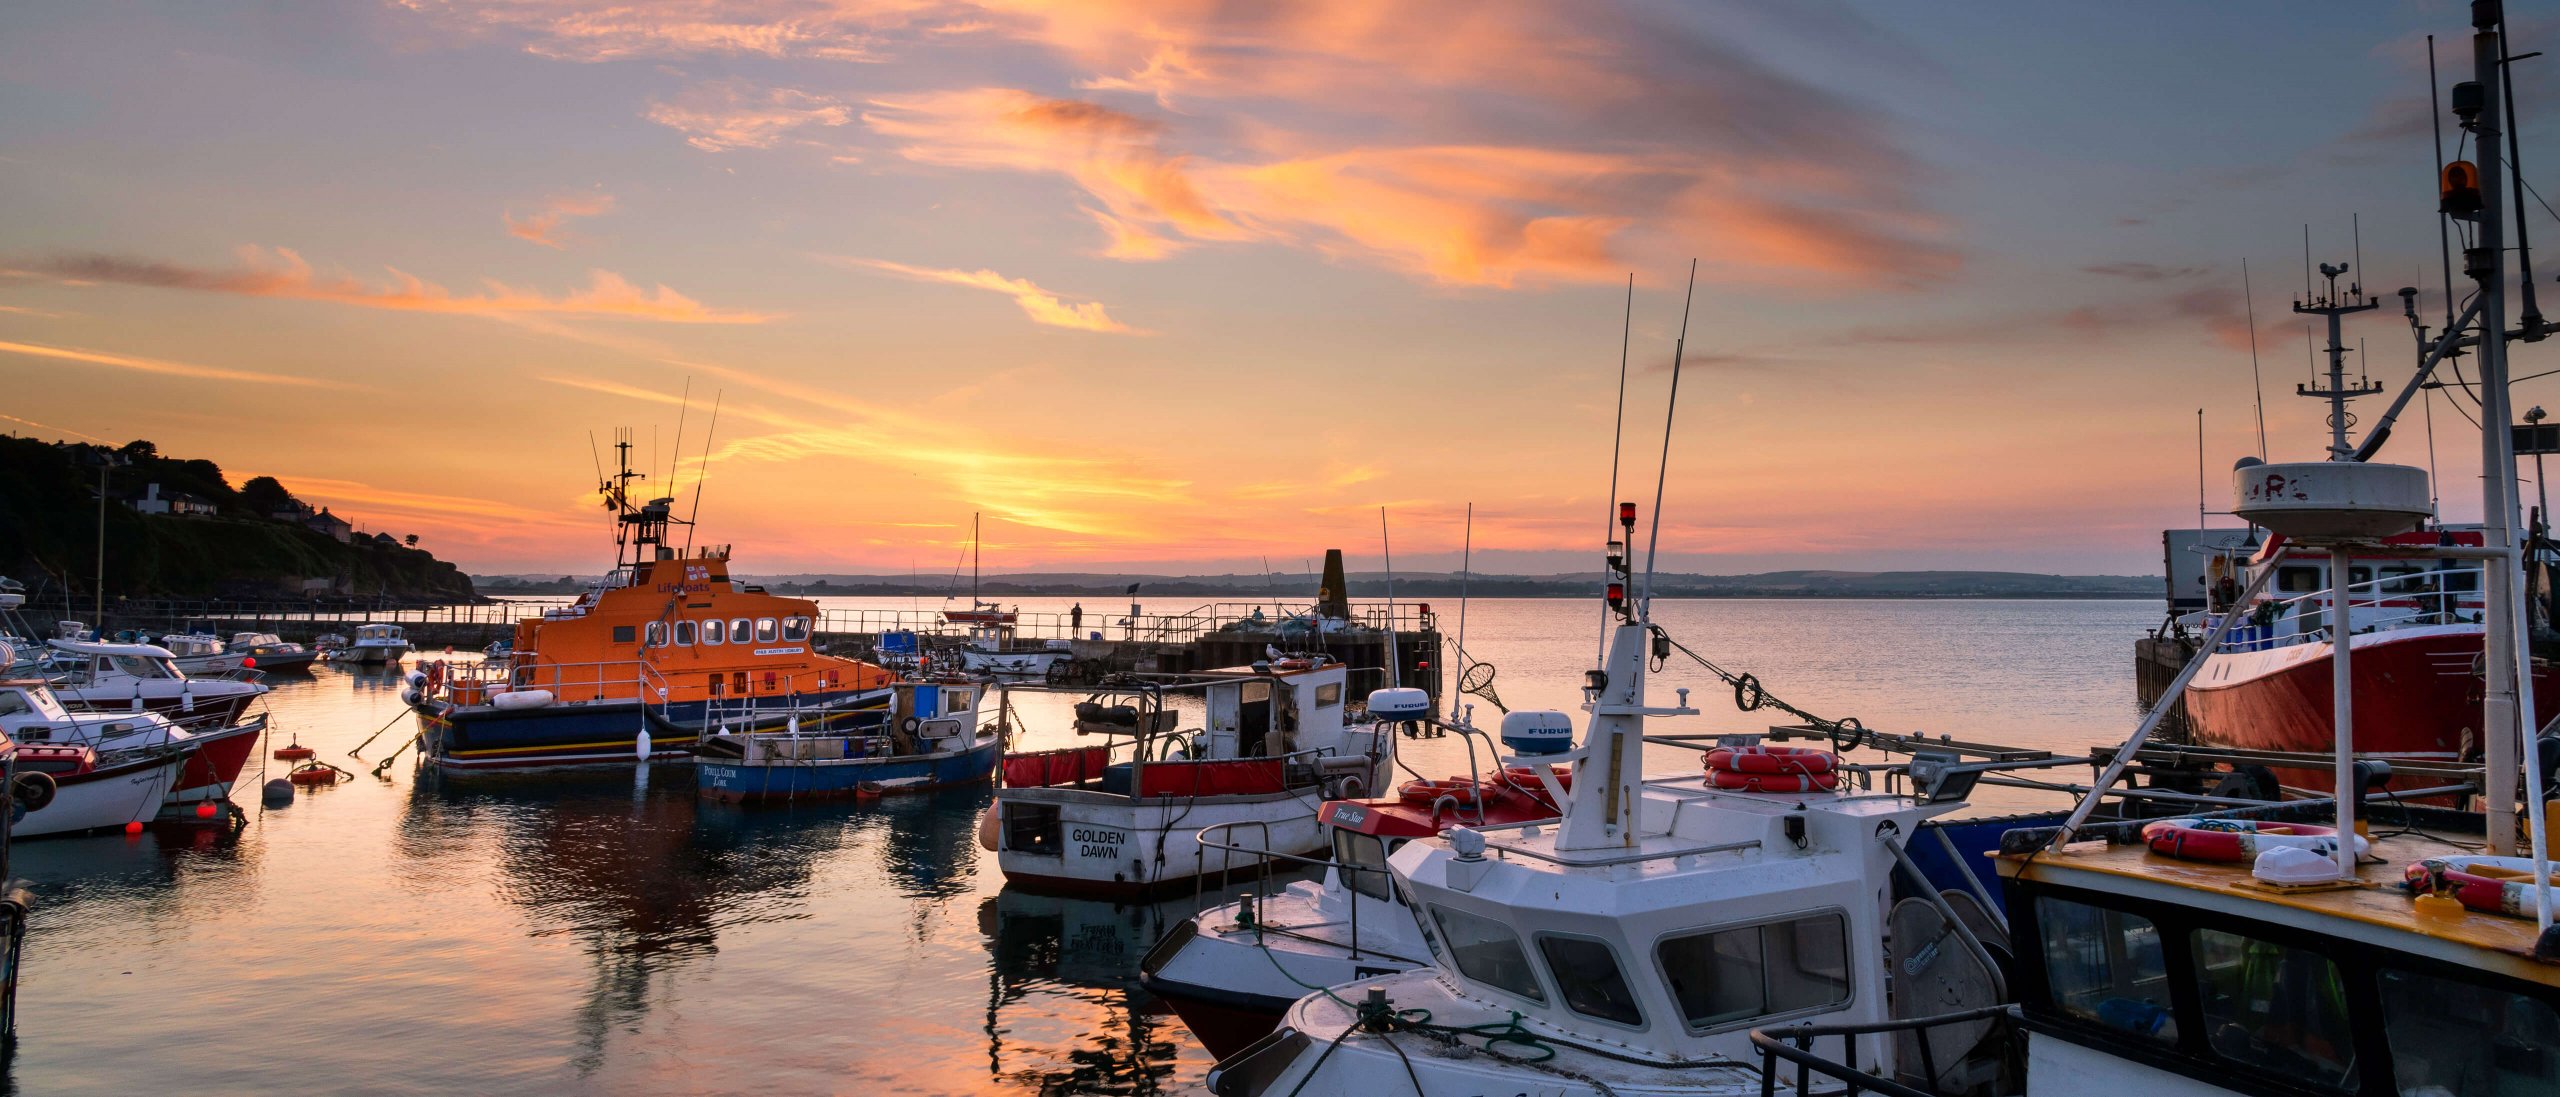 A view of Ballycotton harbour during the sunset with fishing trawlers and other boats in view.